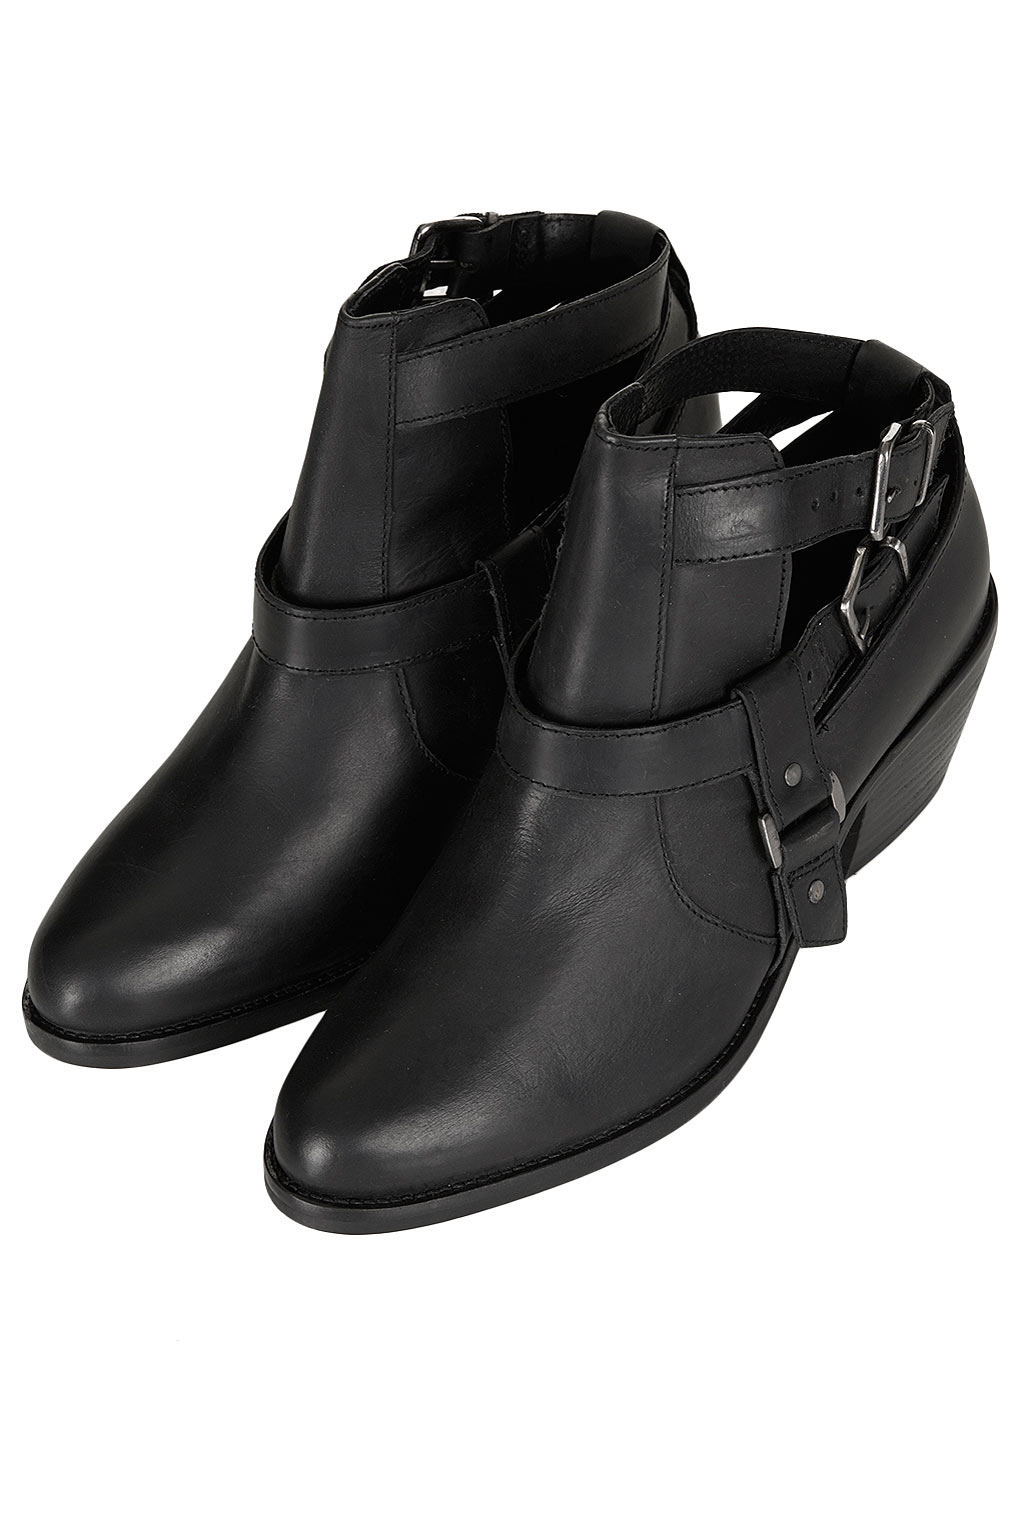 Lyst - Topshop Advance Cutout Western Boots in Black